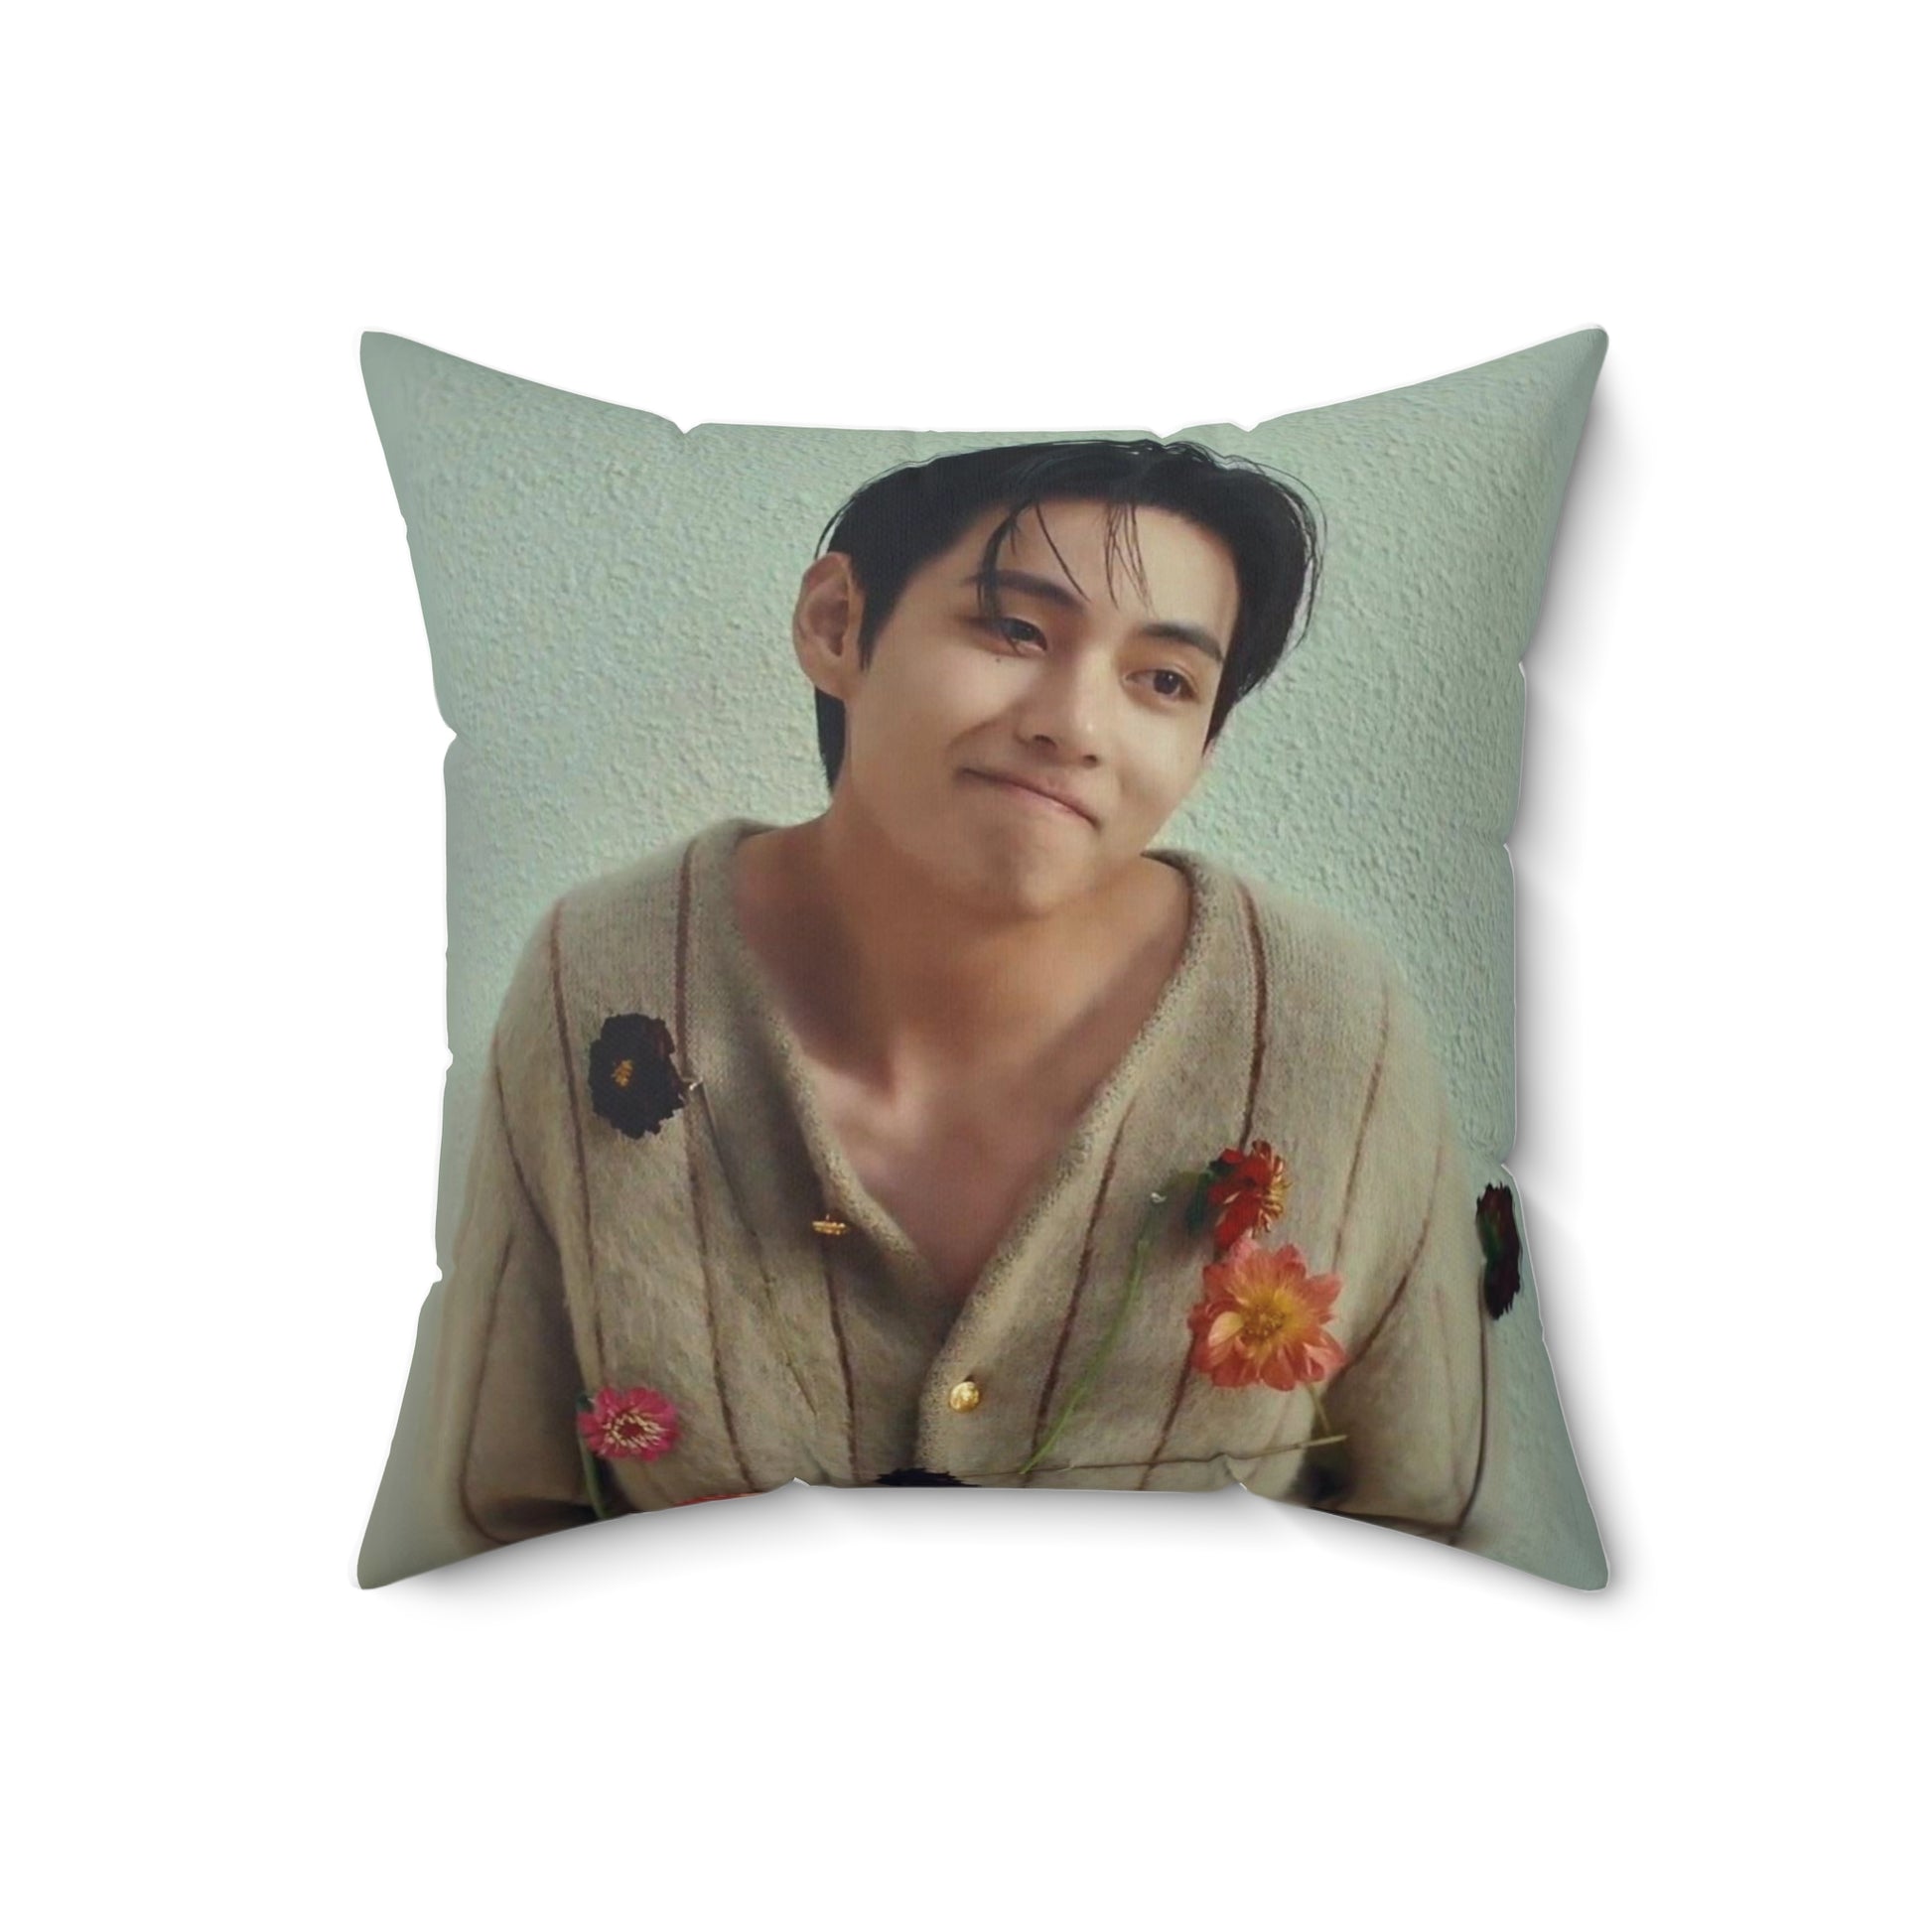 bts v merch pillow gift for army